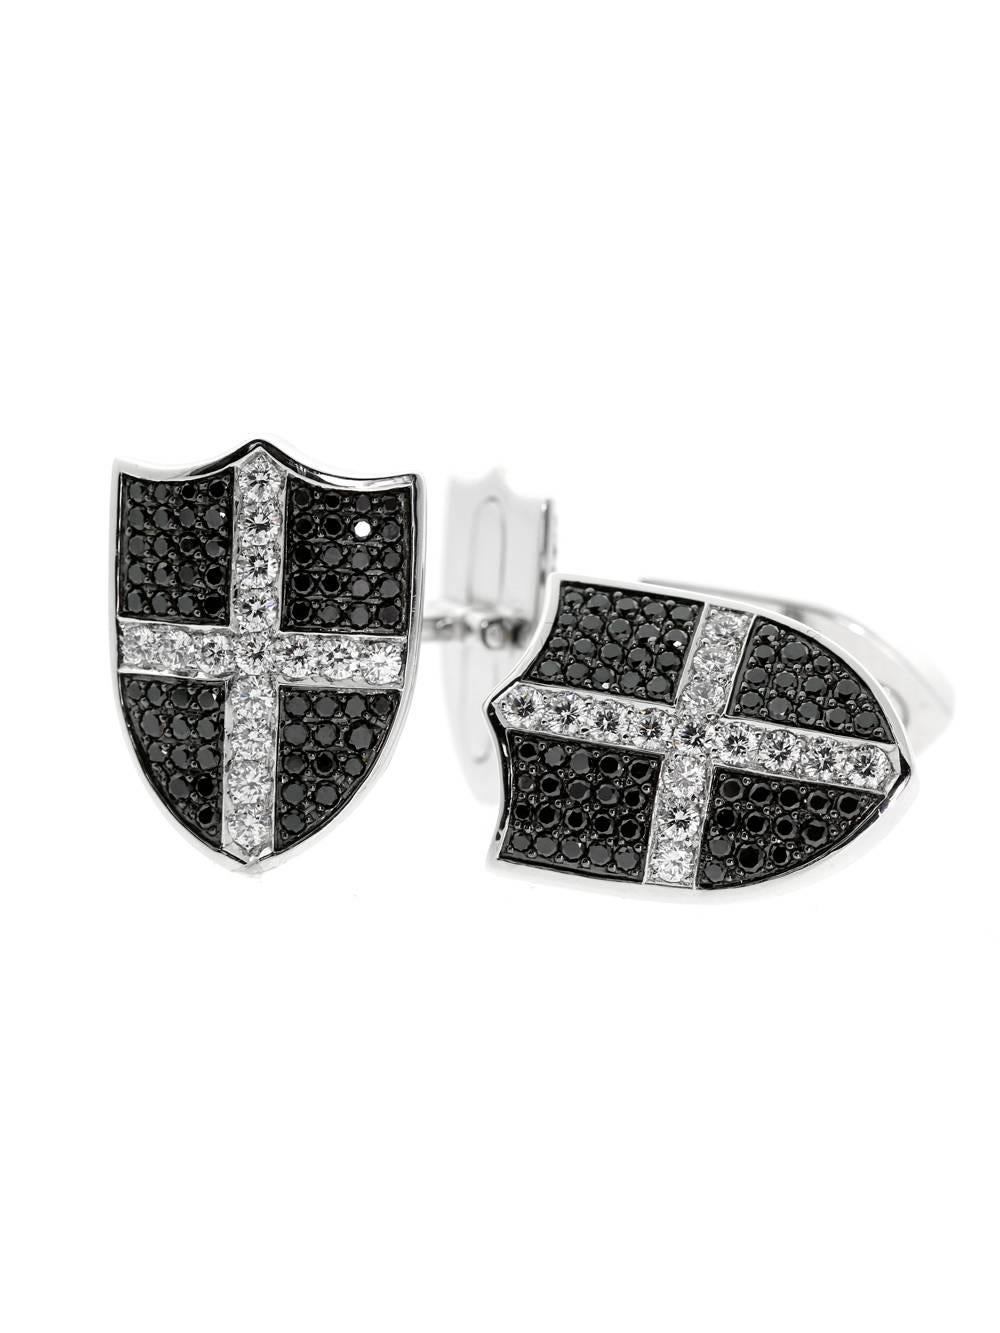 Stunning diamond cufflinks by Garrard made from 18-karat white gold, featuring a shield motif adorned with 4ct of black and white diamonds.

Made of 18K White Gold
Hallmarks: Garrard, Austria, 750
Weight: 21.0 Grams
Dimensions: